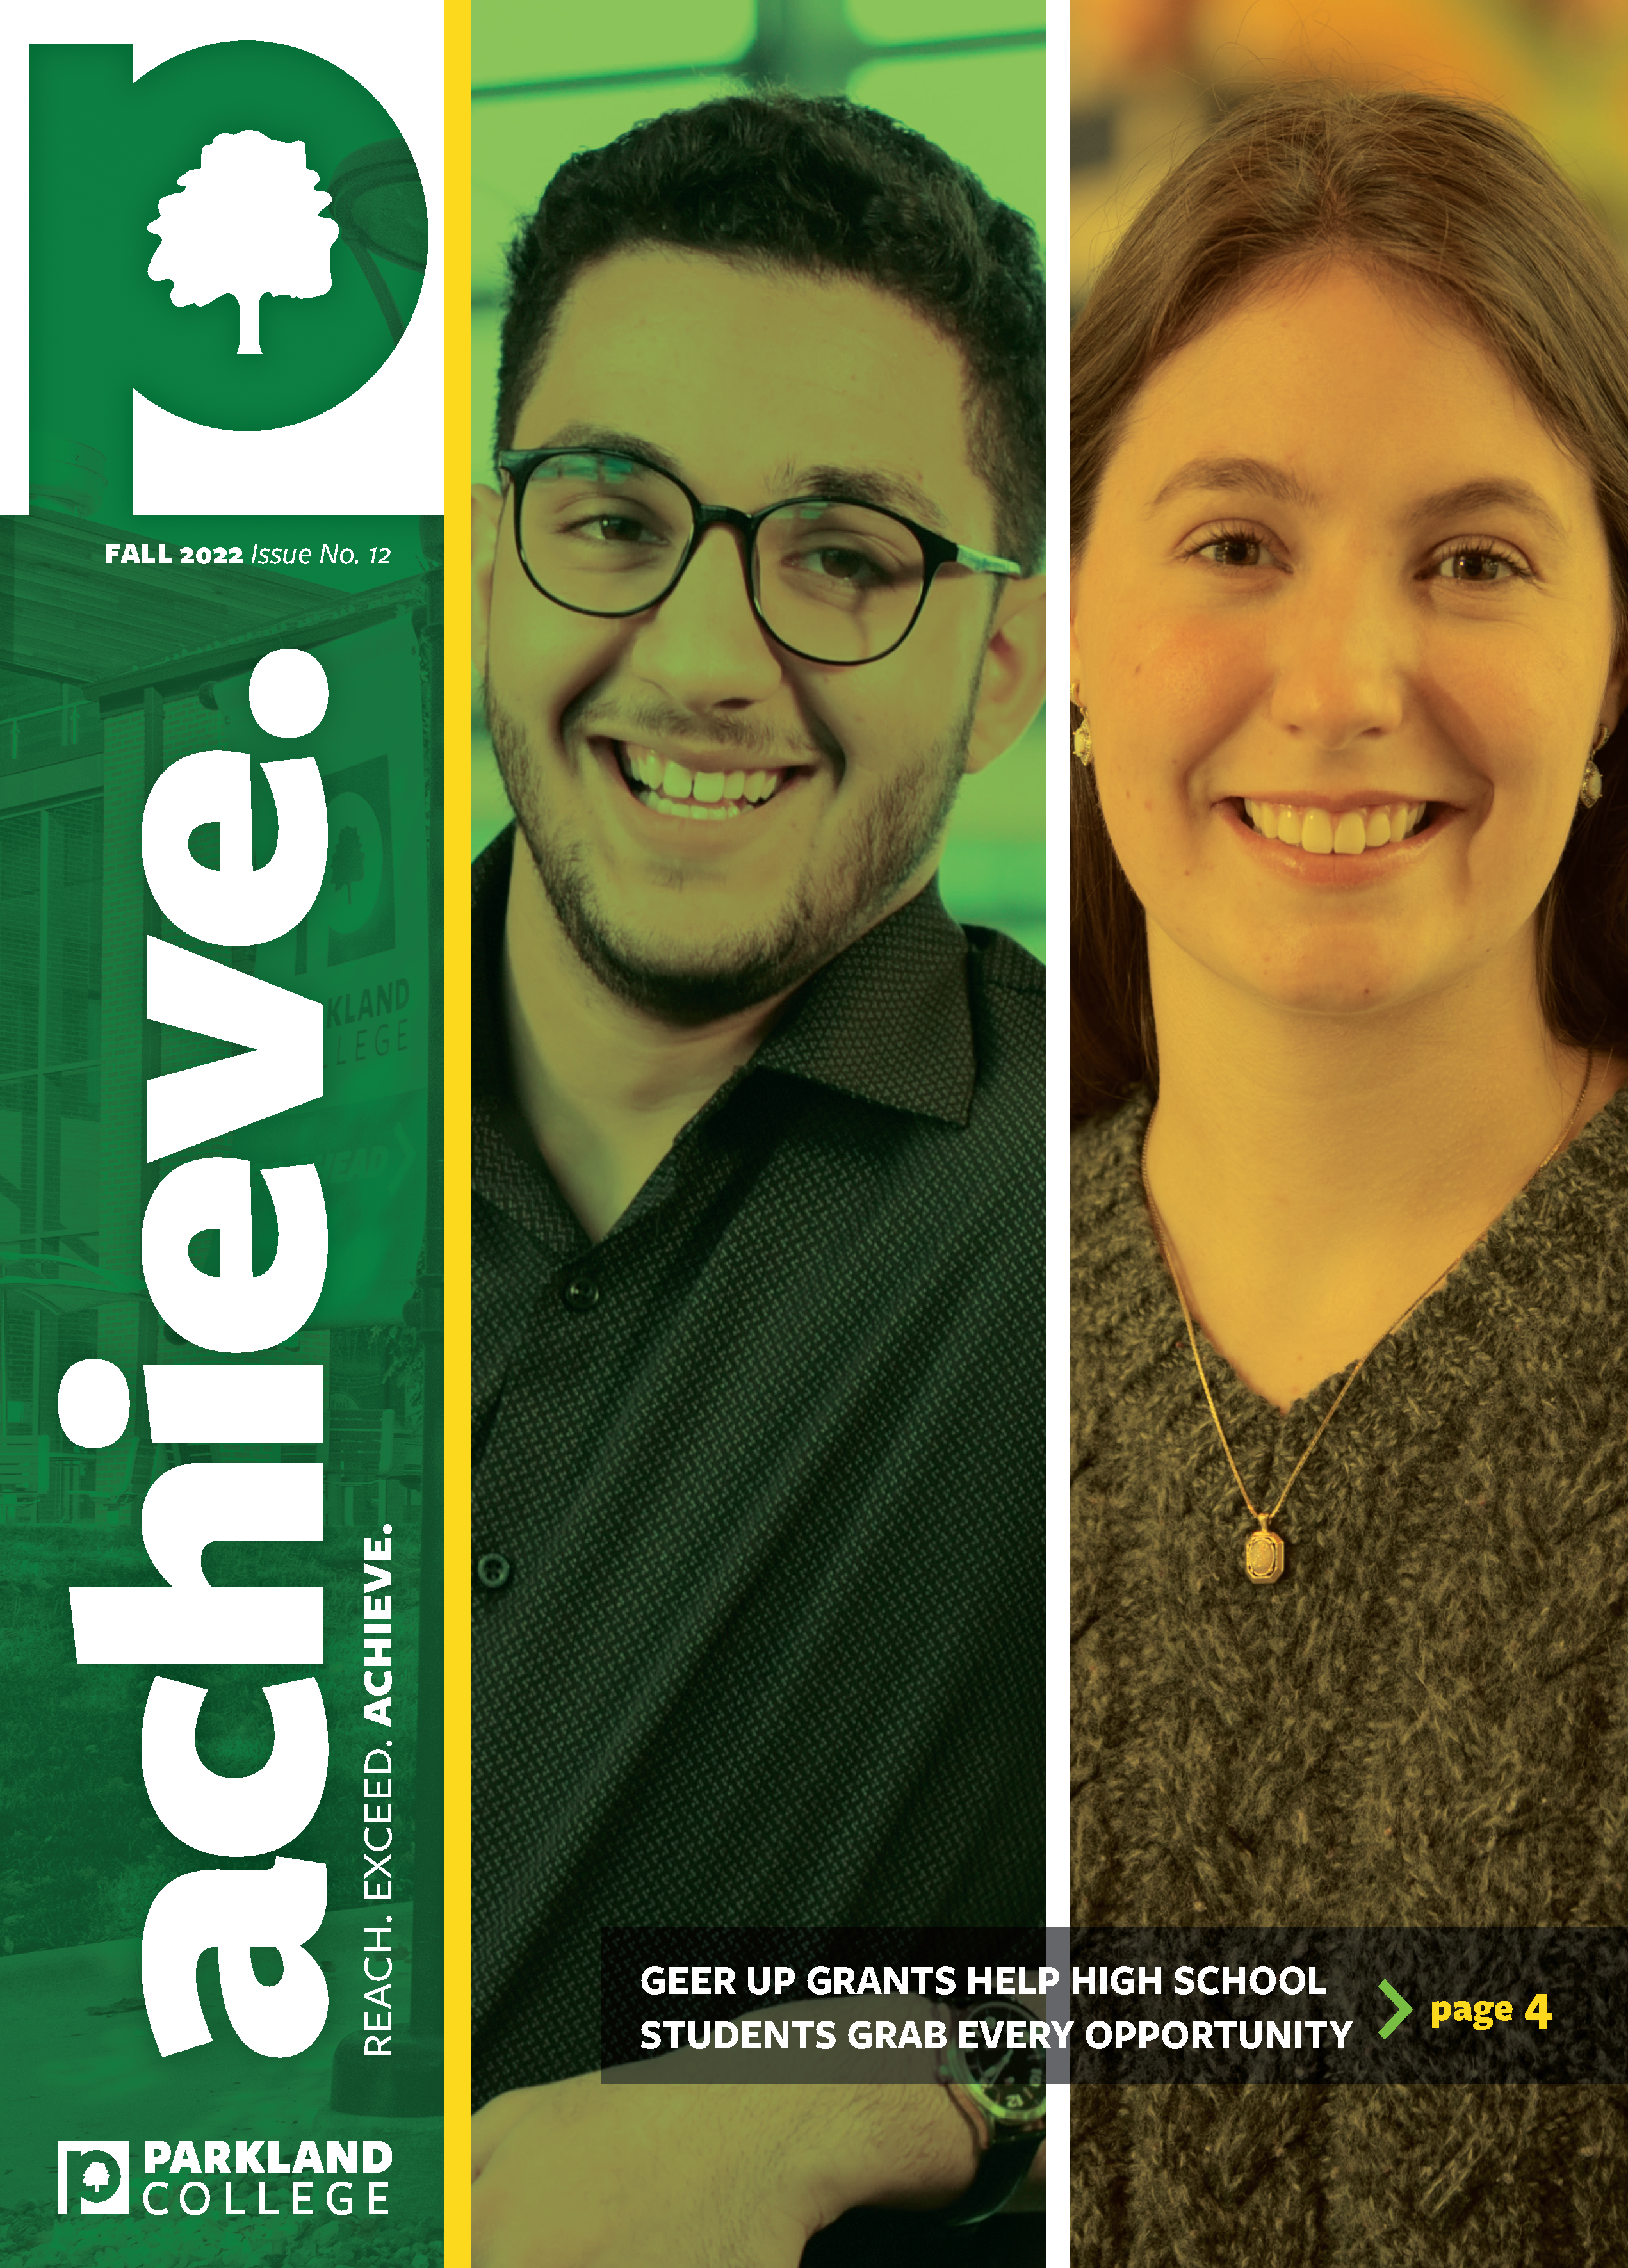 Cover of Fall 2022 mailer with side by side student faces in green and gold